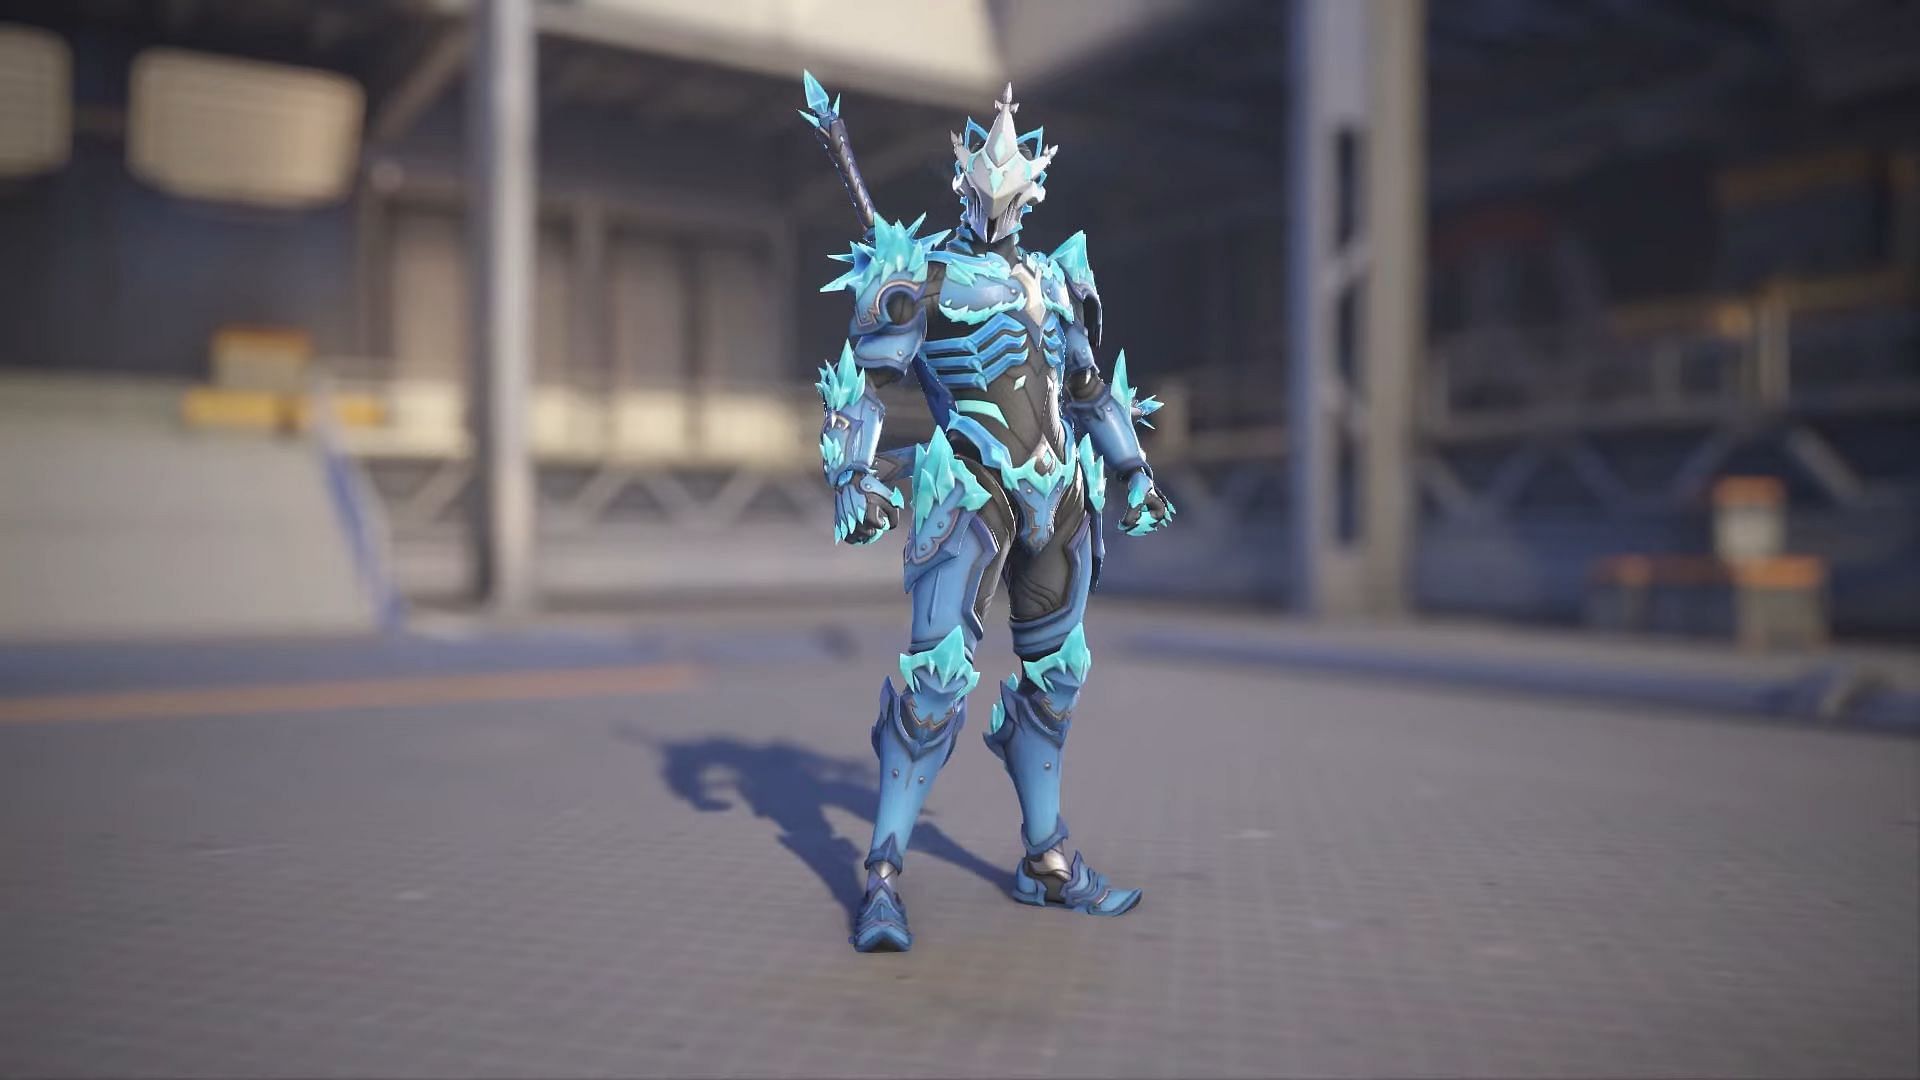 Ice Wraith skin as seen in Overwatch 2 (Image via Blizzard Entertainment)